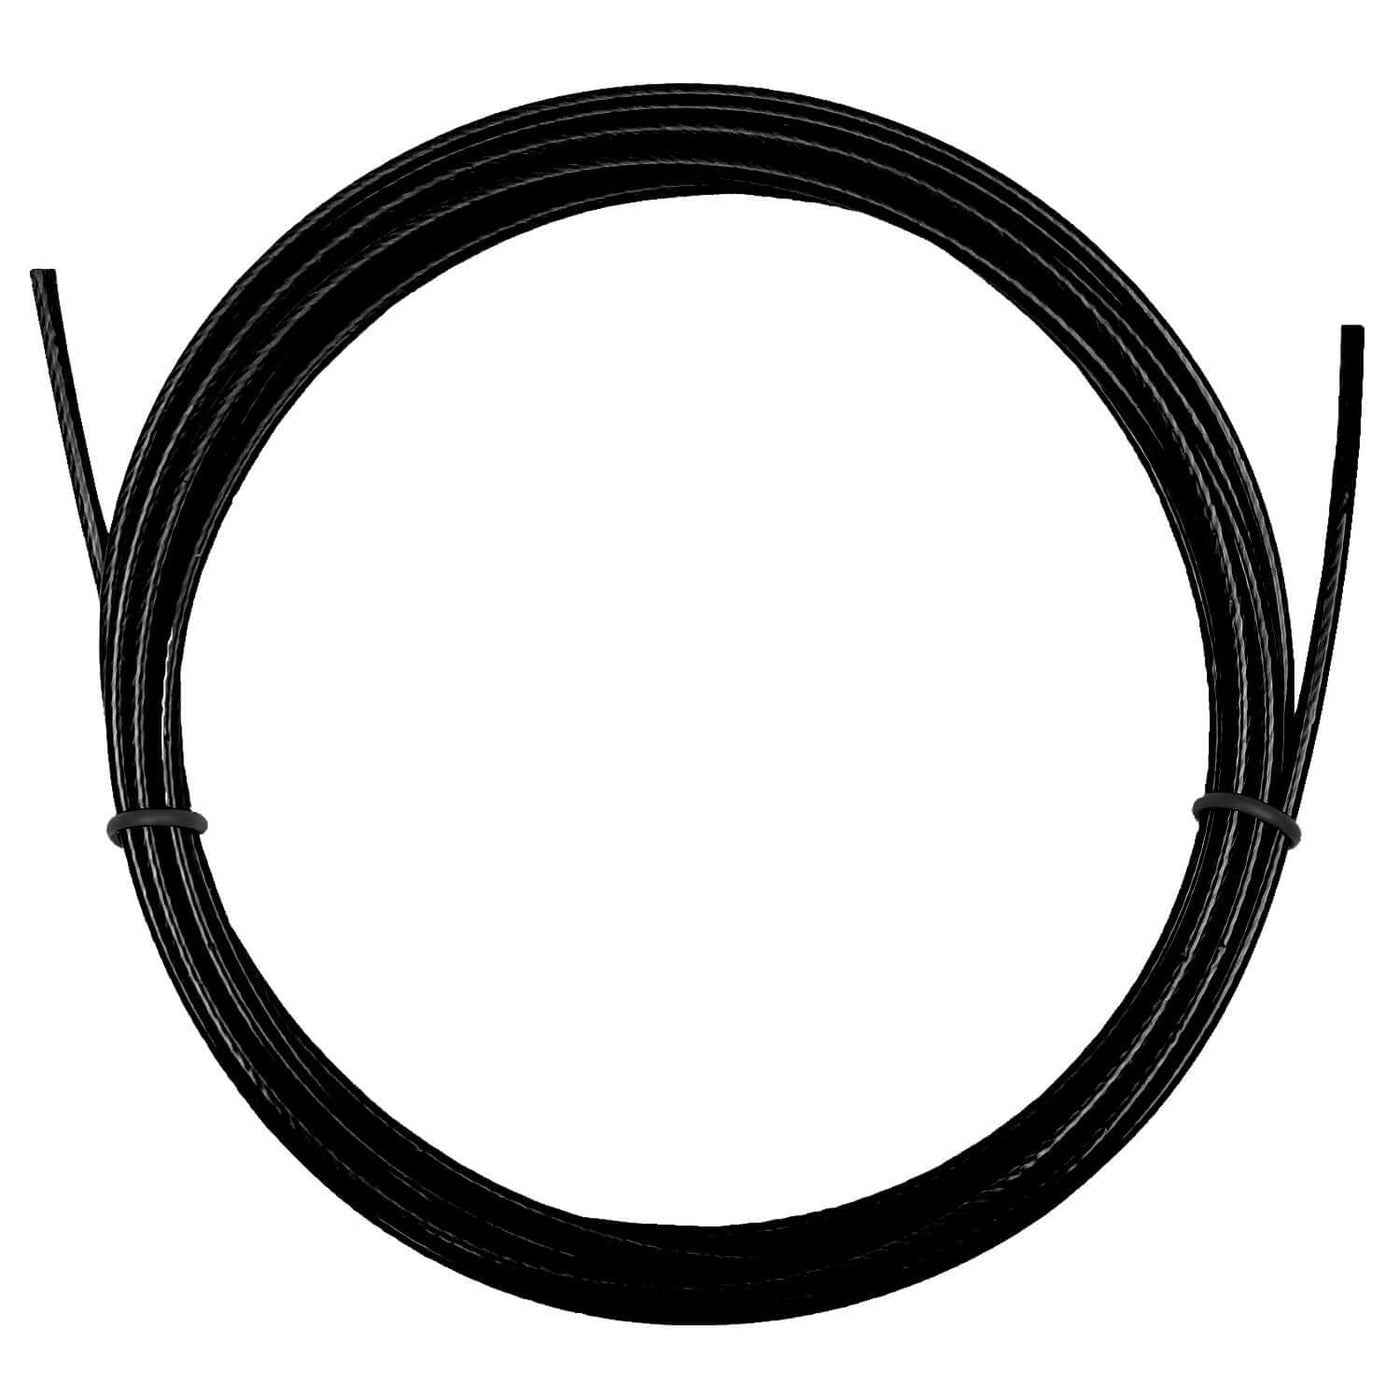 Murgs Replacement Skipping Rope Cable 3.4mm Black